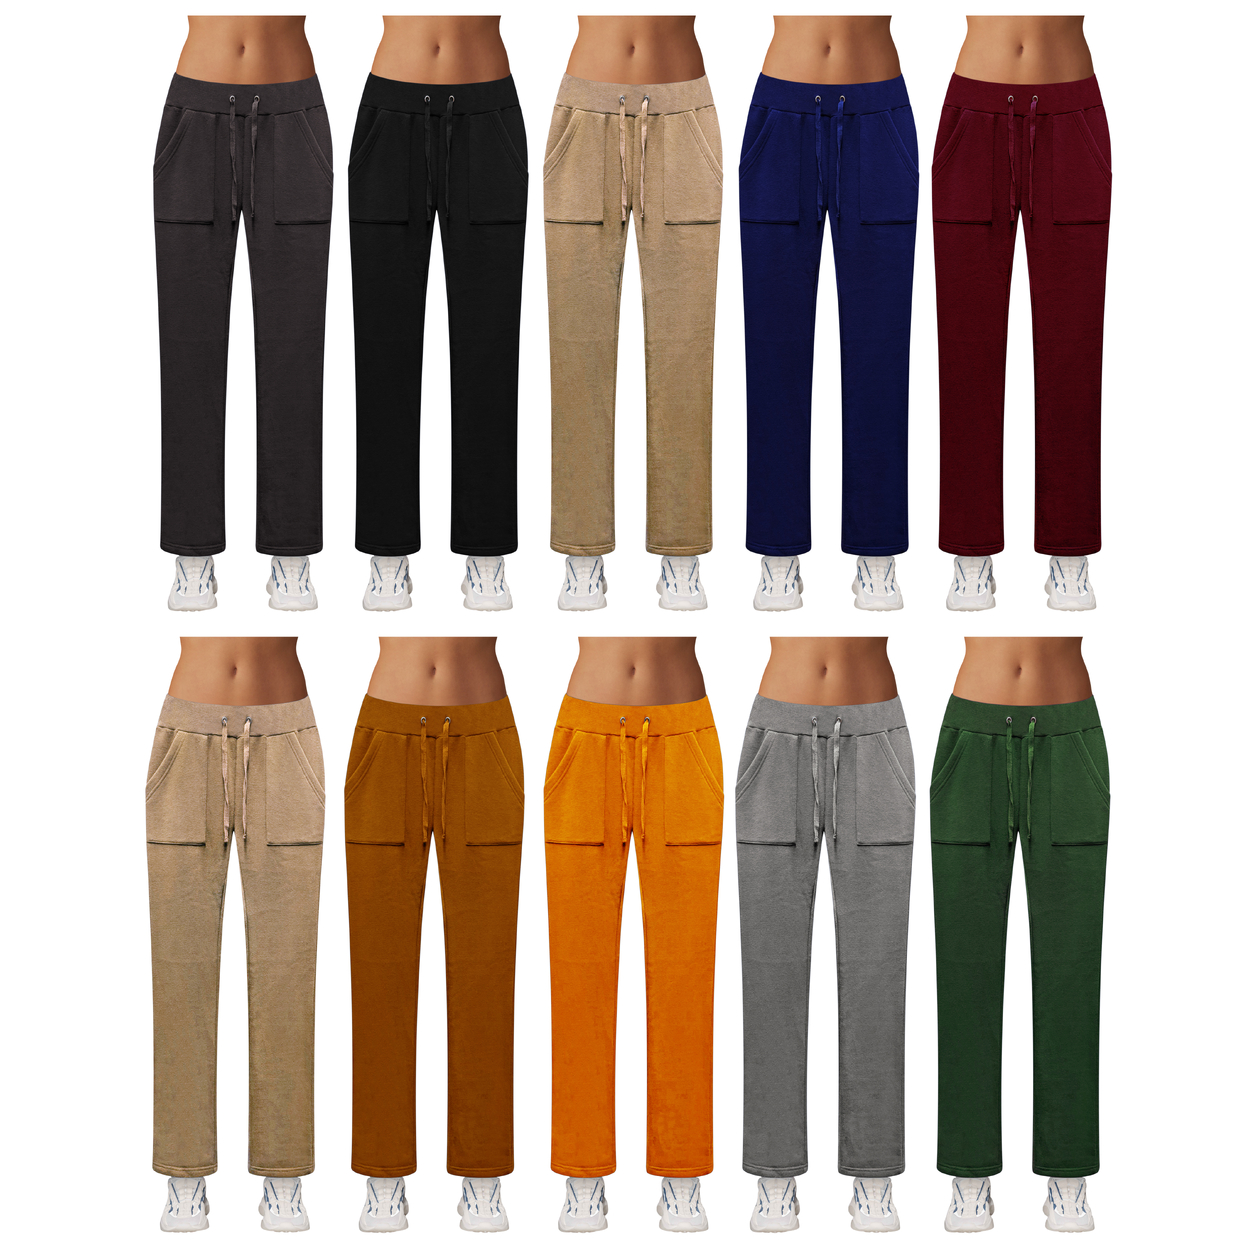 Multi-Pack: Women's Ultra-Soft Cozy Fleece Lined Elastic Waistband Terry Knit Pants - 3-pack, Large